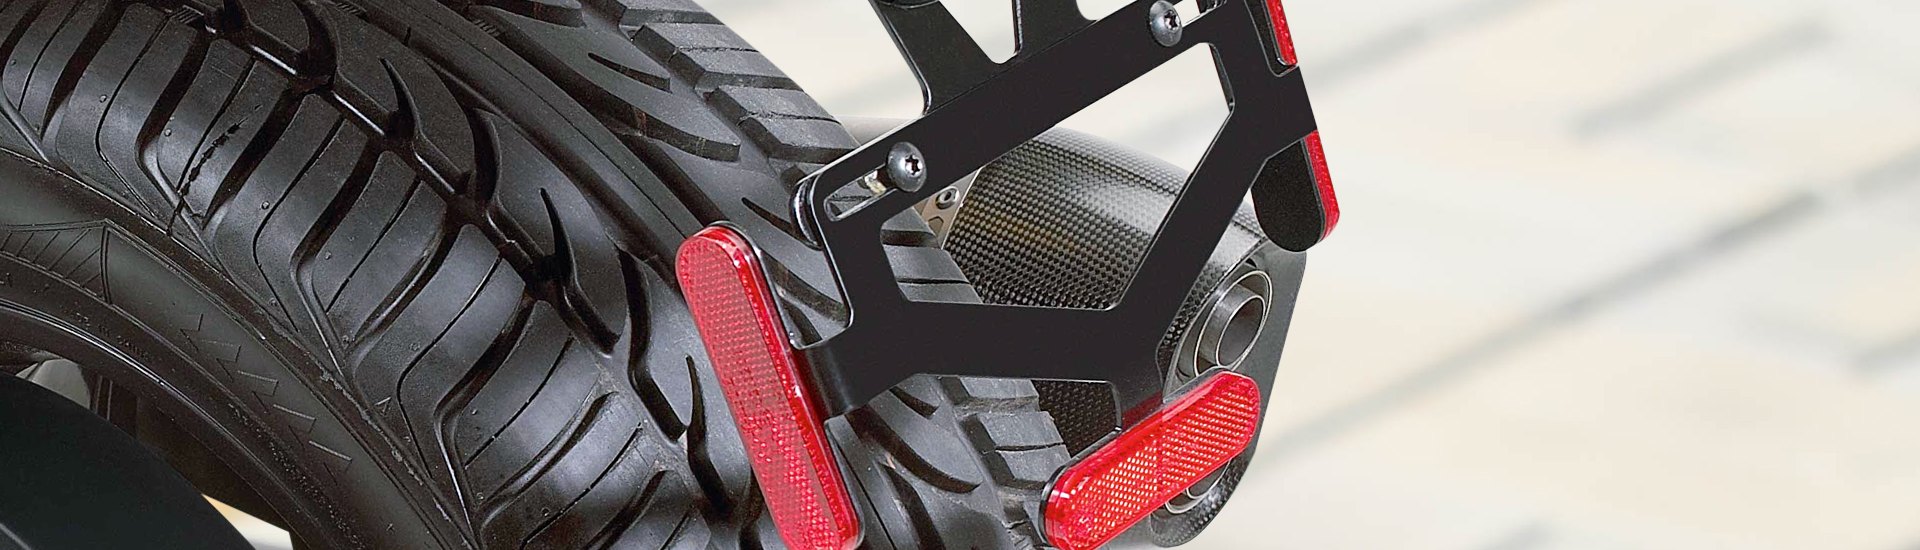 Motorcycle License Plate Accessories